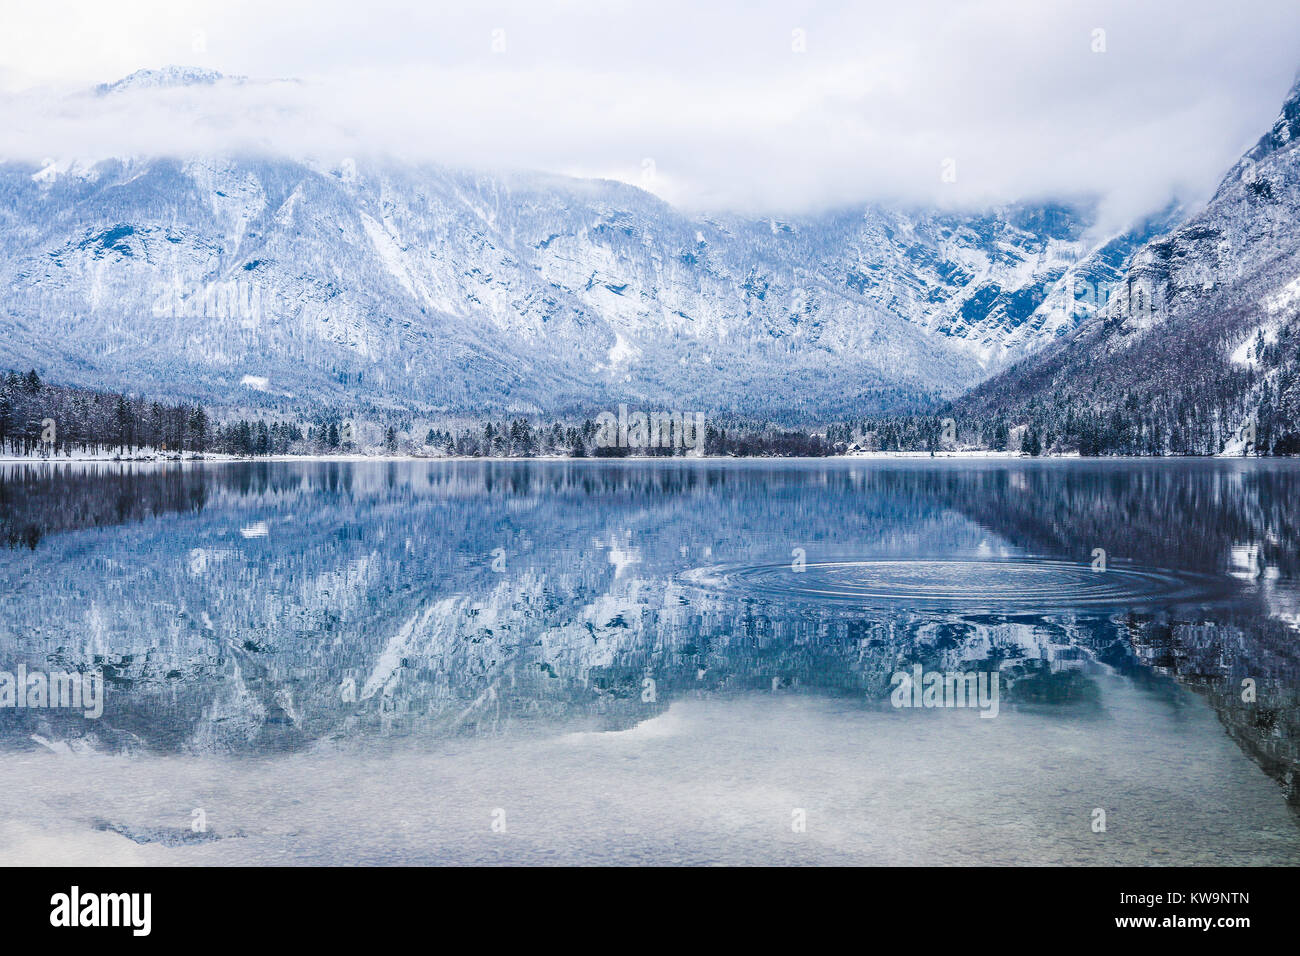 The stunning serenity of Lake Bohinj, Slovenia, is captured in this wonderful image, perfect to adorn the front of a Christmas card or postcard. Stock Photo